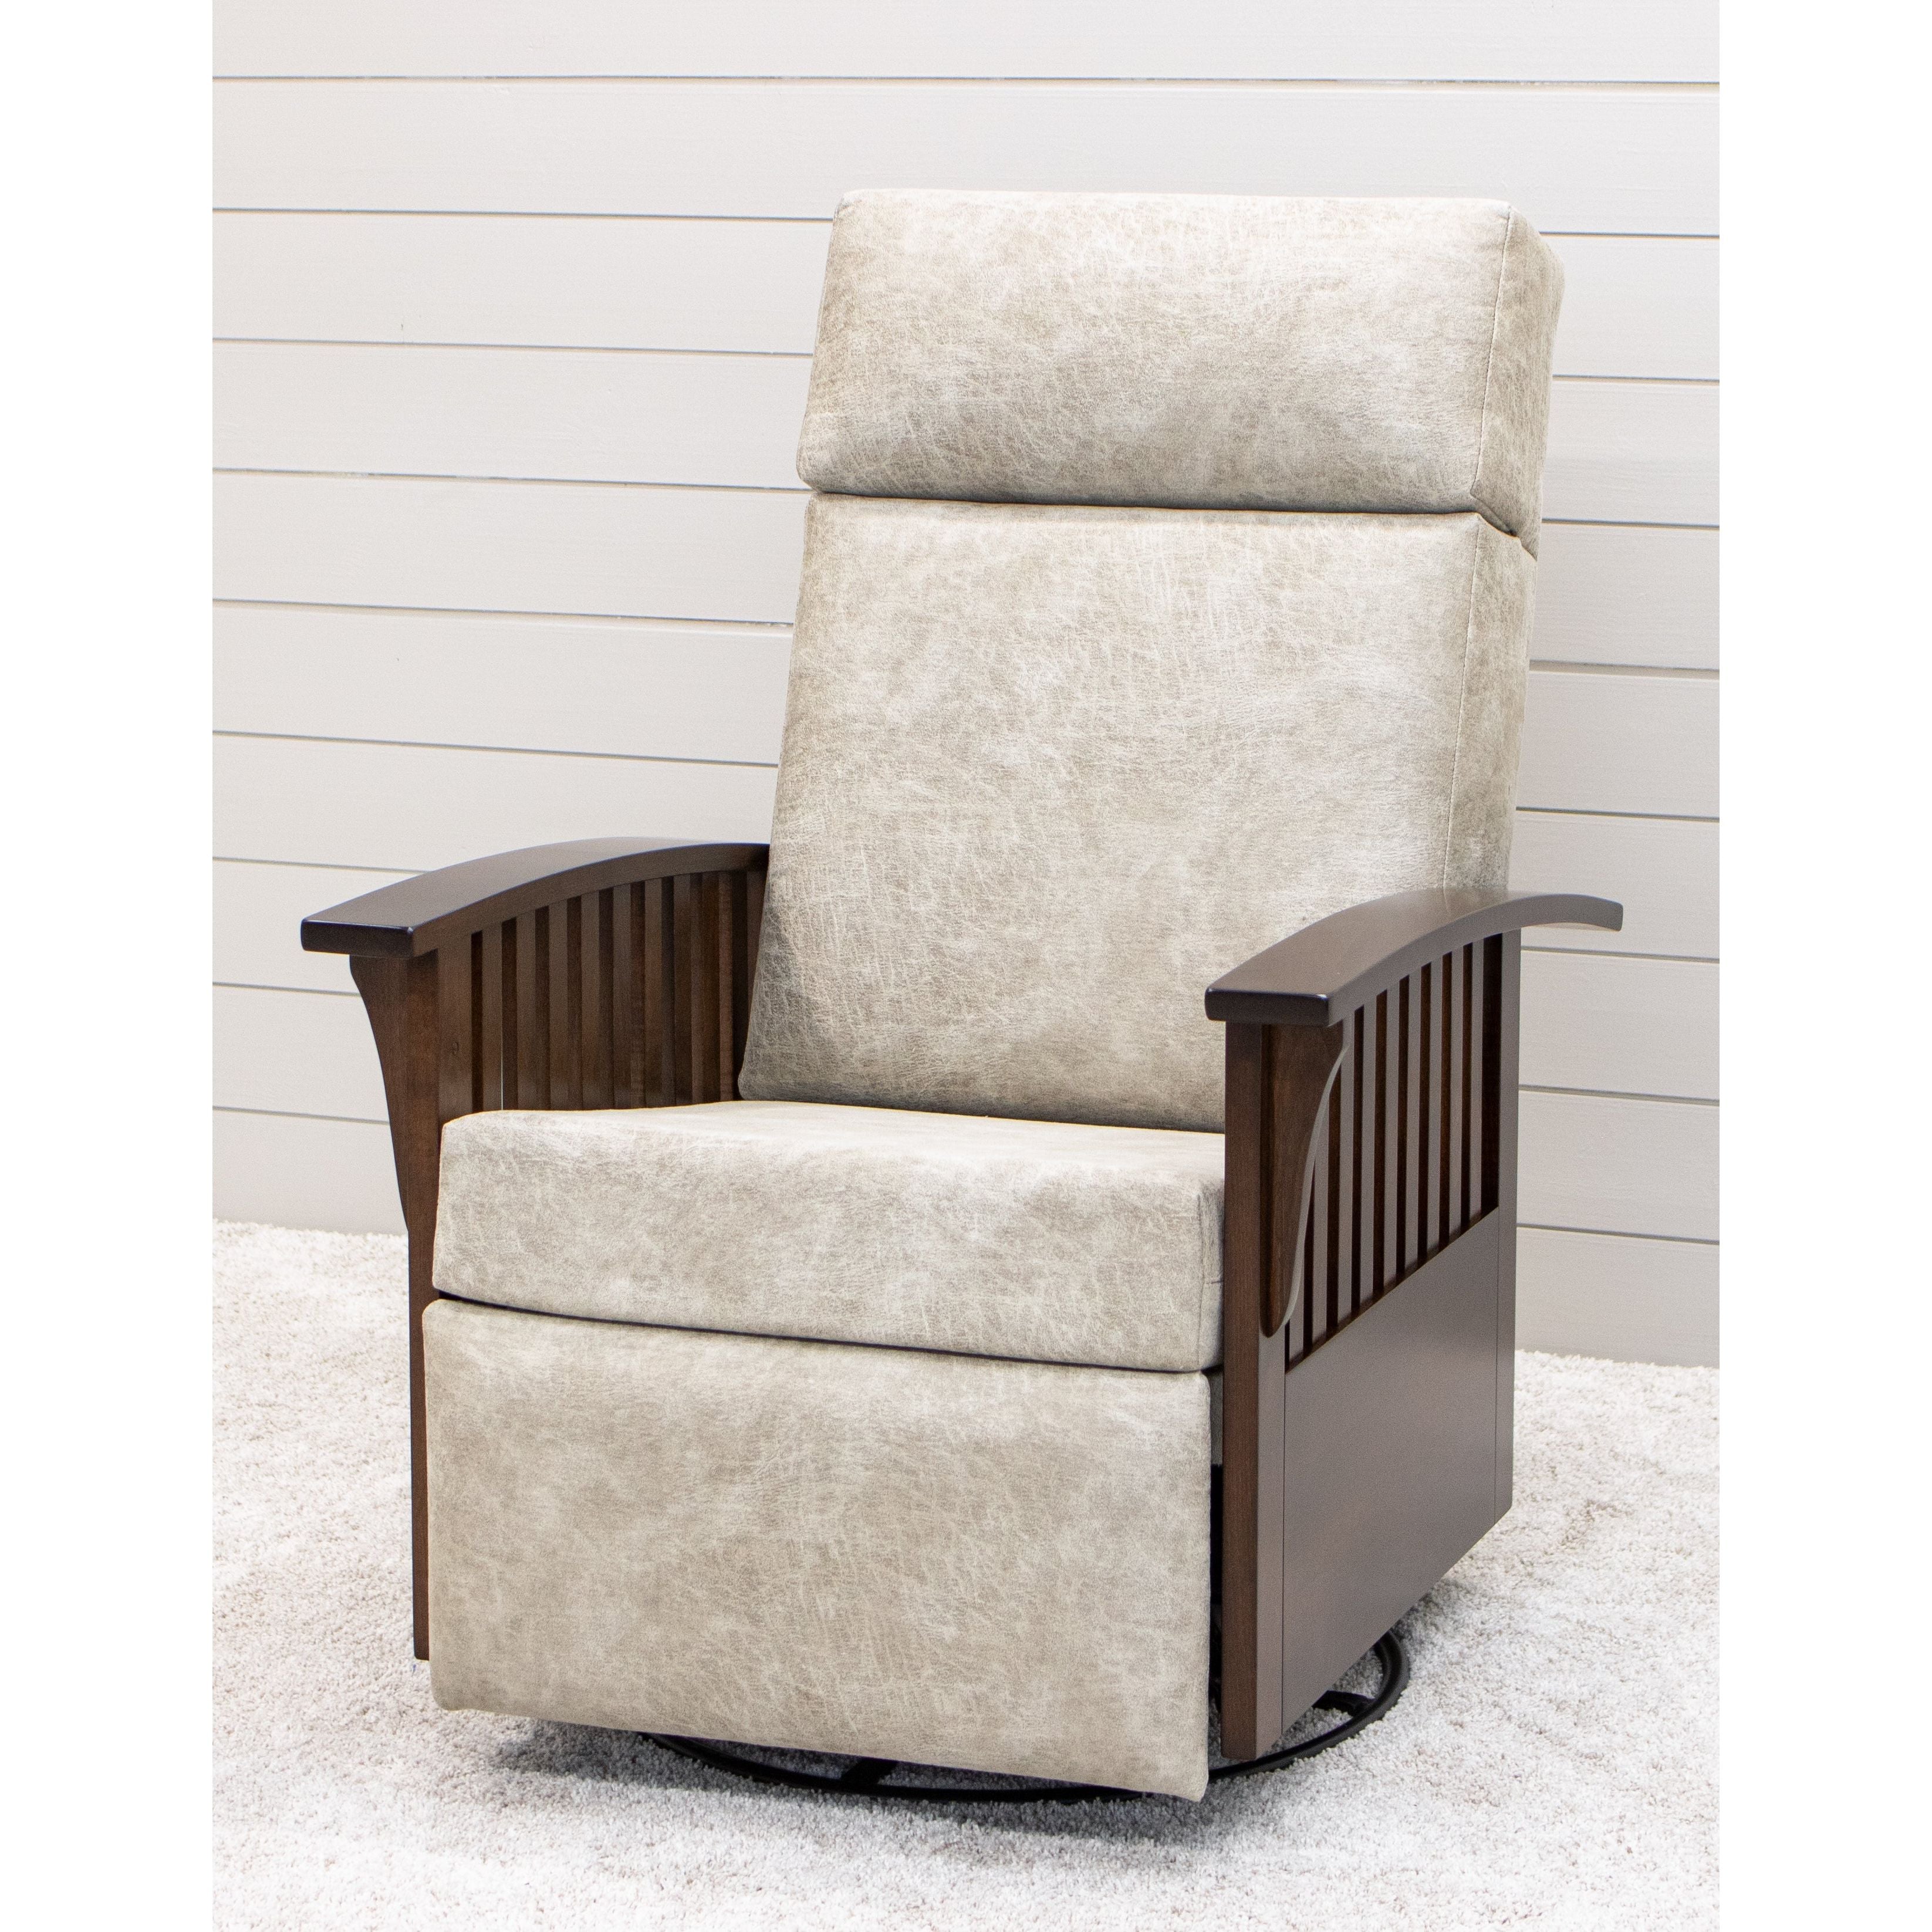 Mission Swivel Glider Recliner with Wood Arms